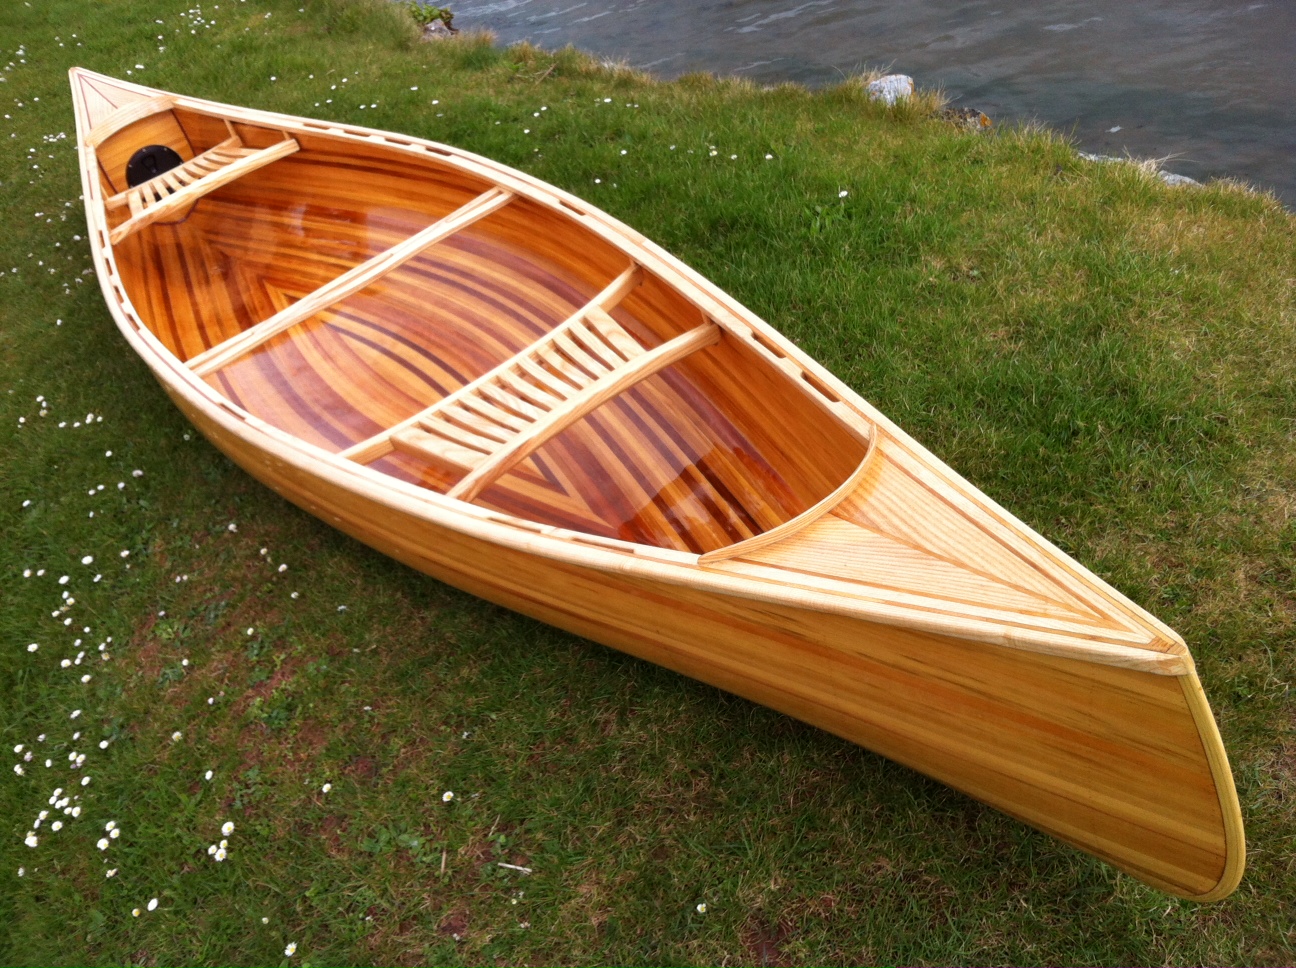 Canoe built by Dave Taper